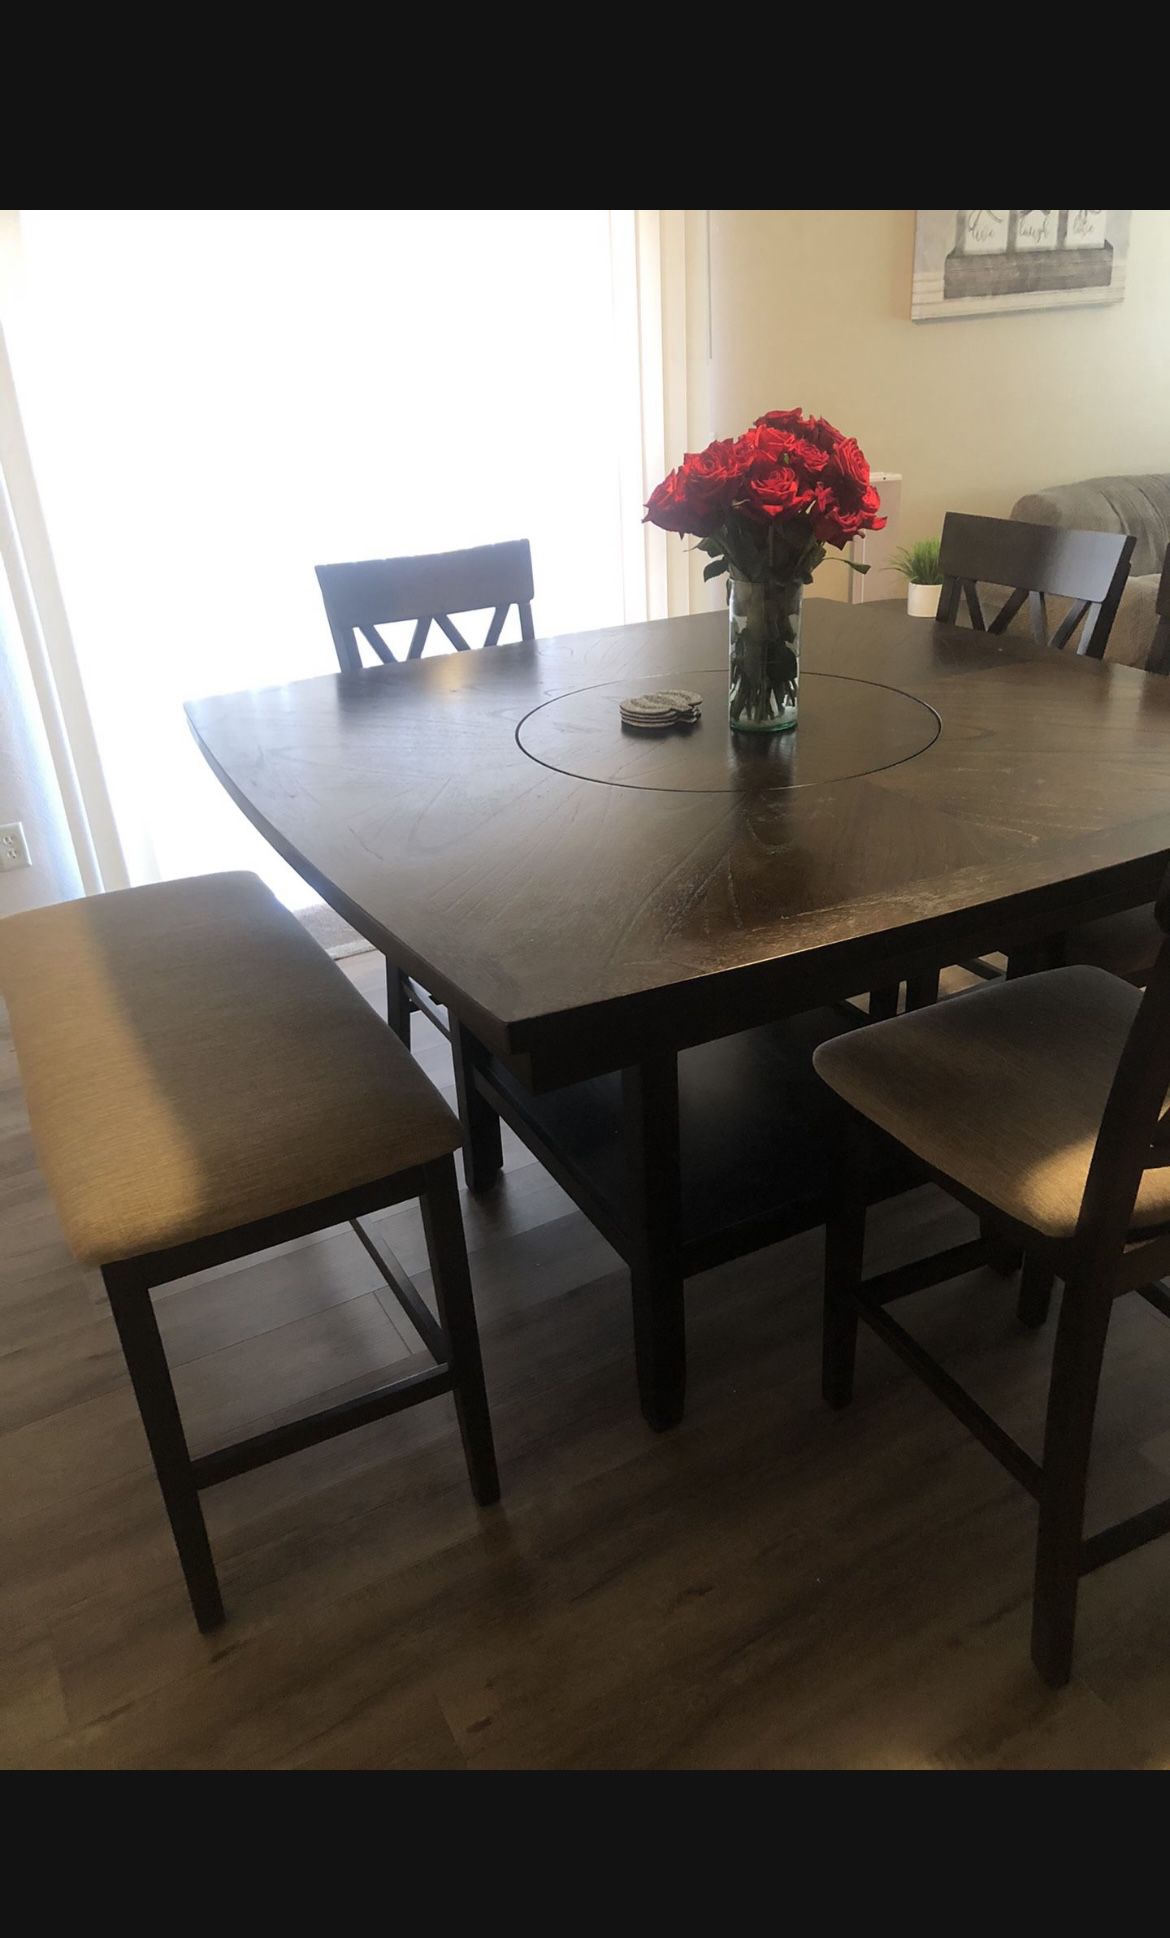 Dining Room/Kitchen Table With Lazy Susan -Chairs Included 